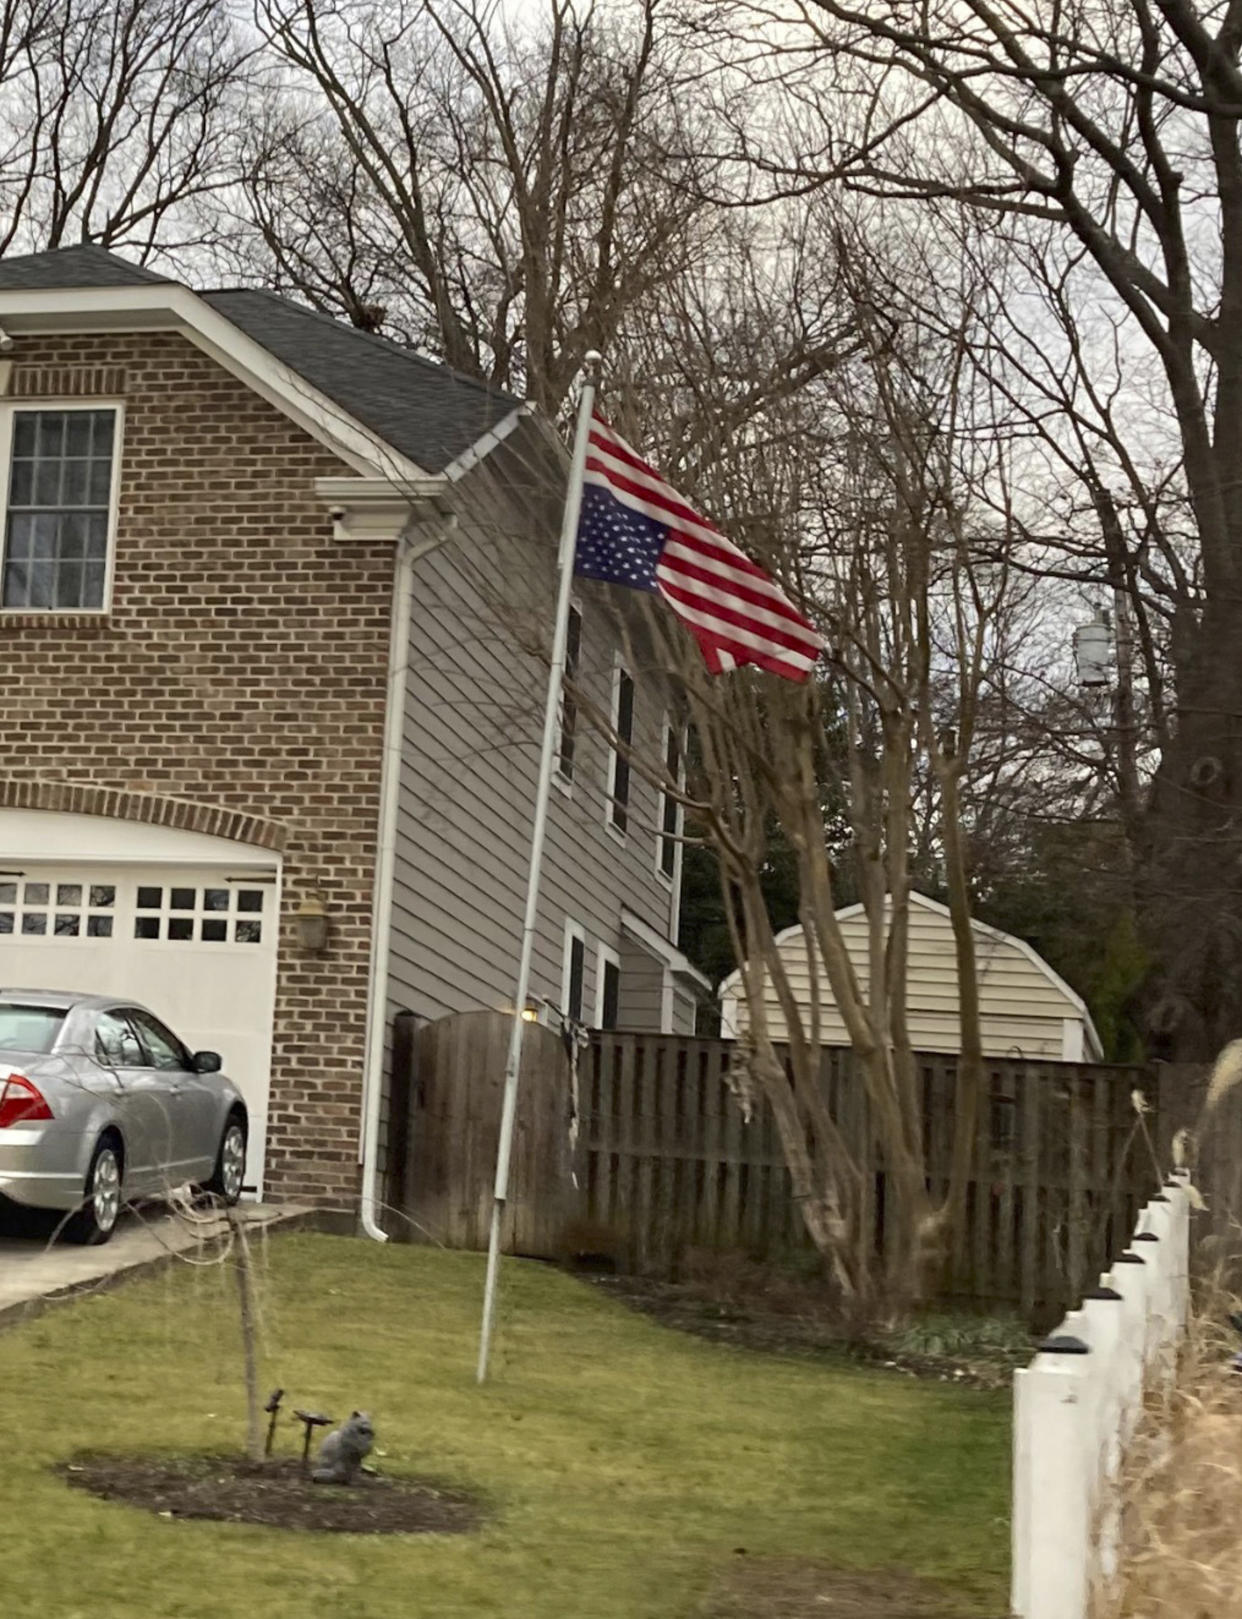 In a photo obtained by The New York Times, an inverted flag flying at the residence of Supreme Court Justice Samuel Alito in Alexandria, Va., on Jan. 17, 2021, three days before the Biden inauguration. (via The New York Times)